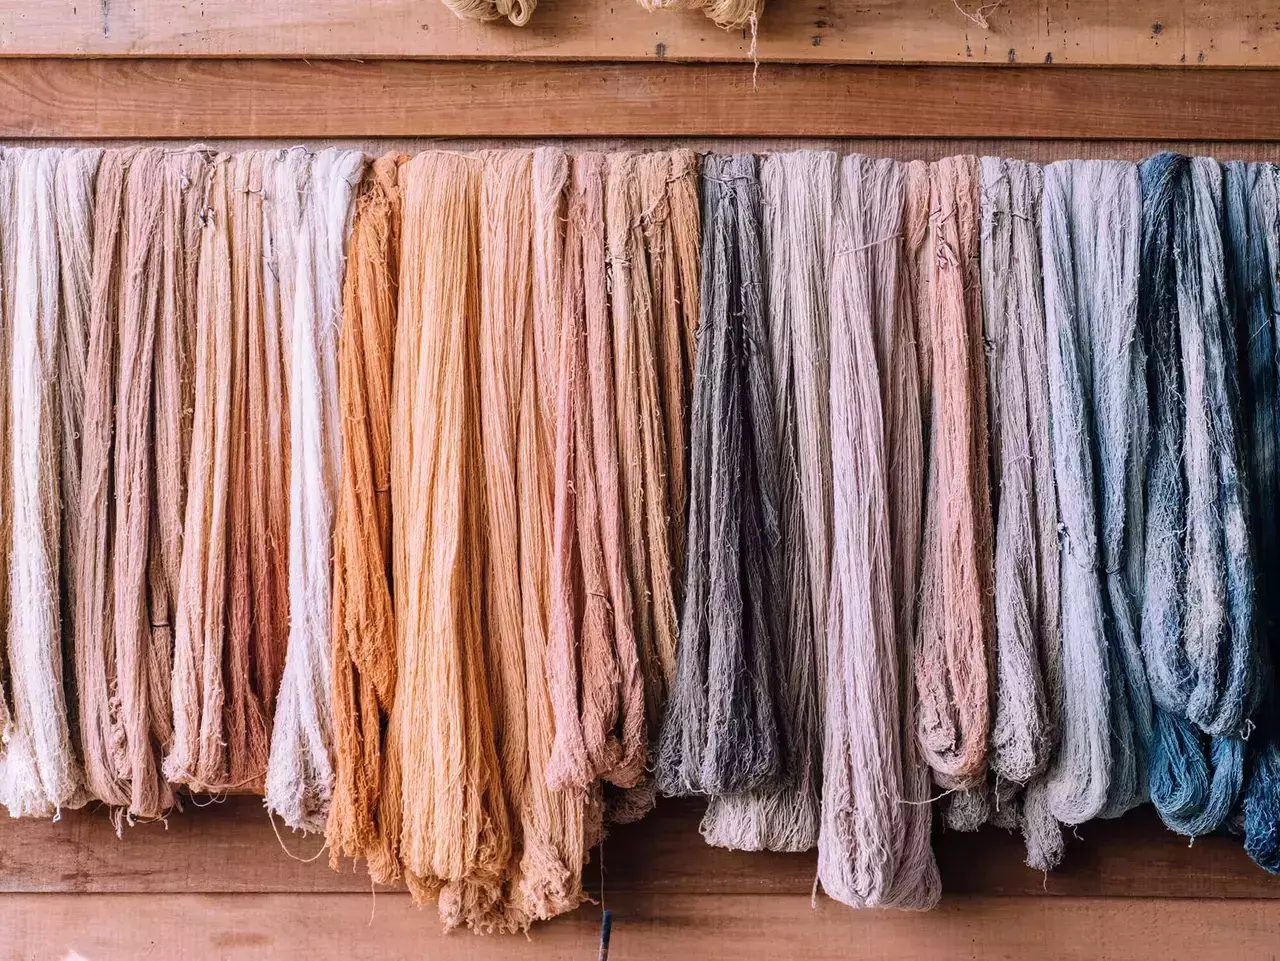 Dyed cotton yarns